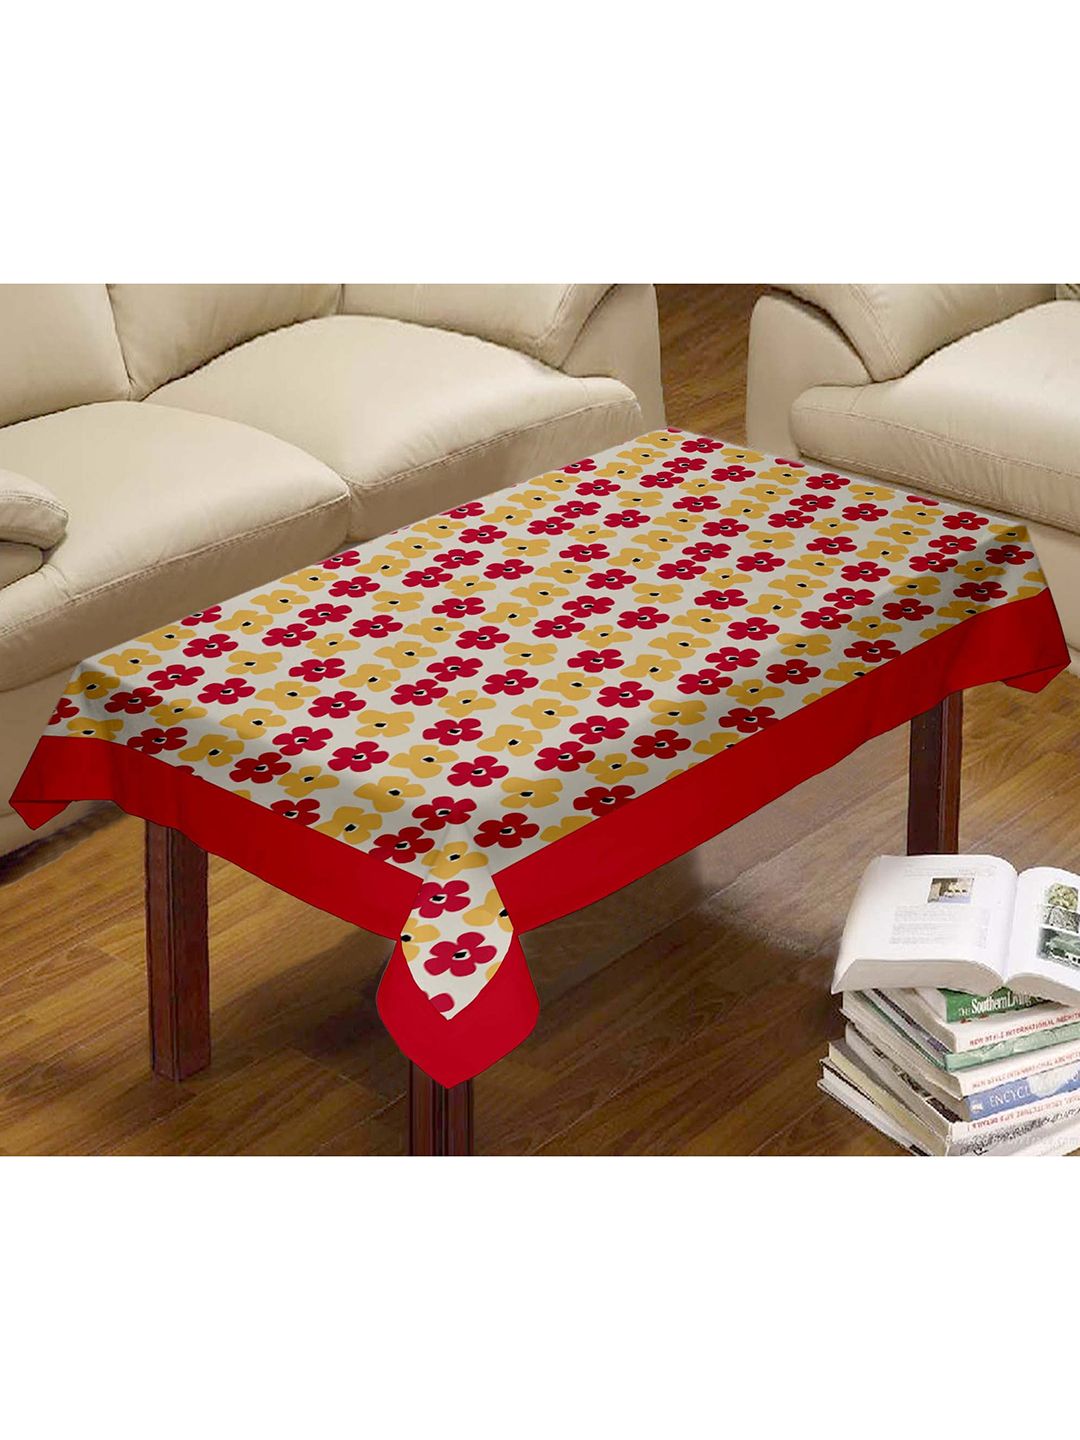 Lushomes Red & White Floral Printed Dining Table Cover Price in India